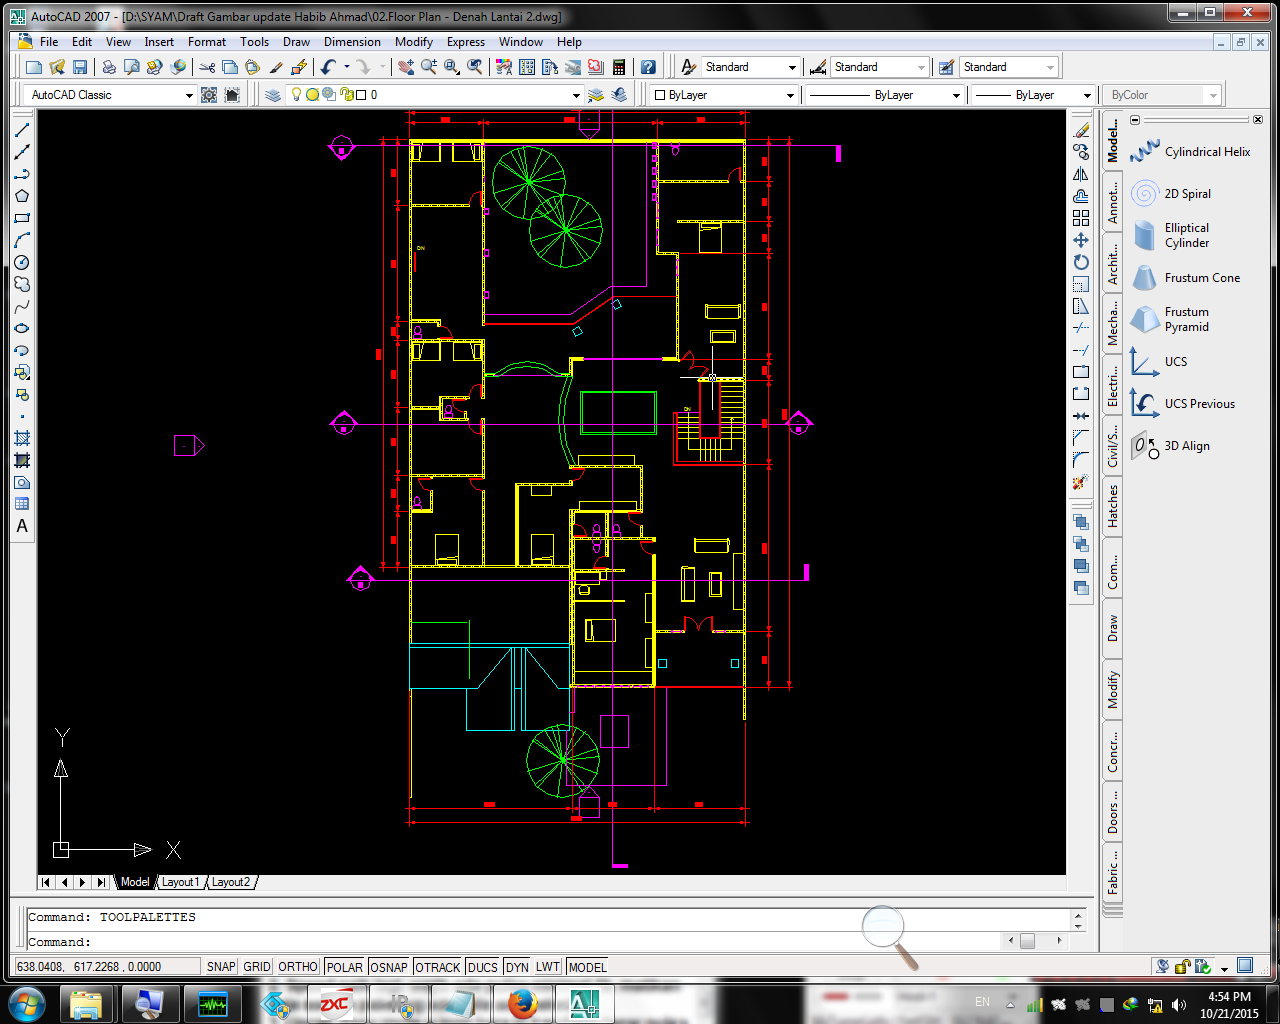 free download autocad software 2007